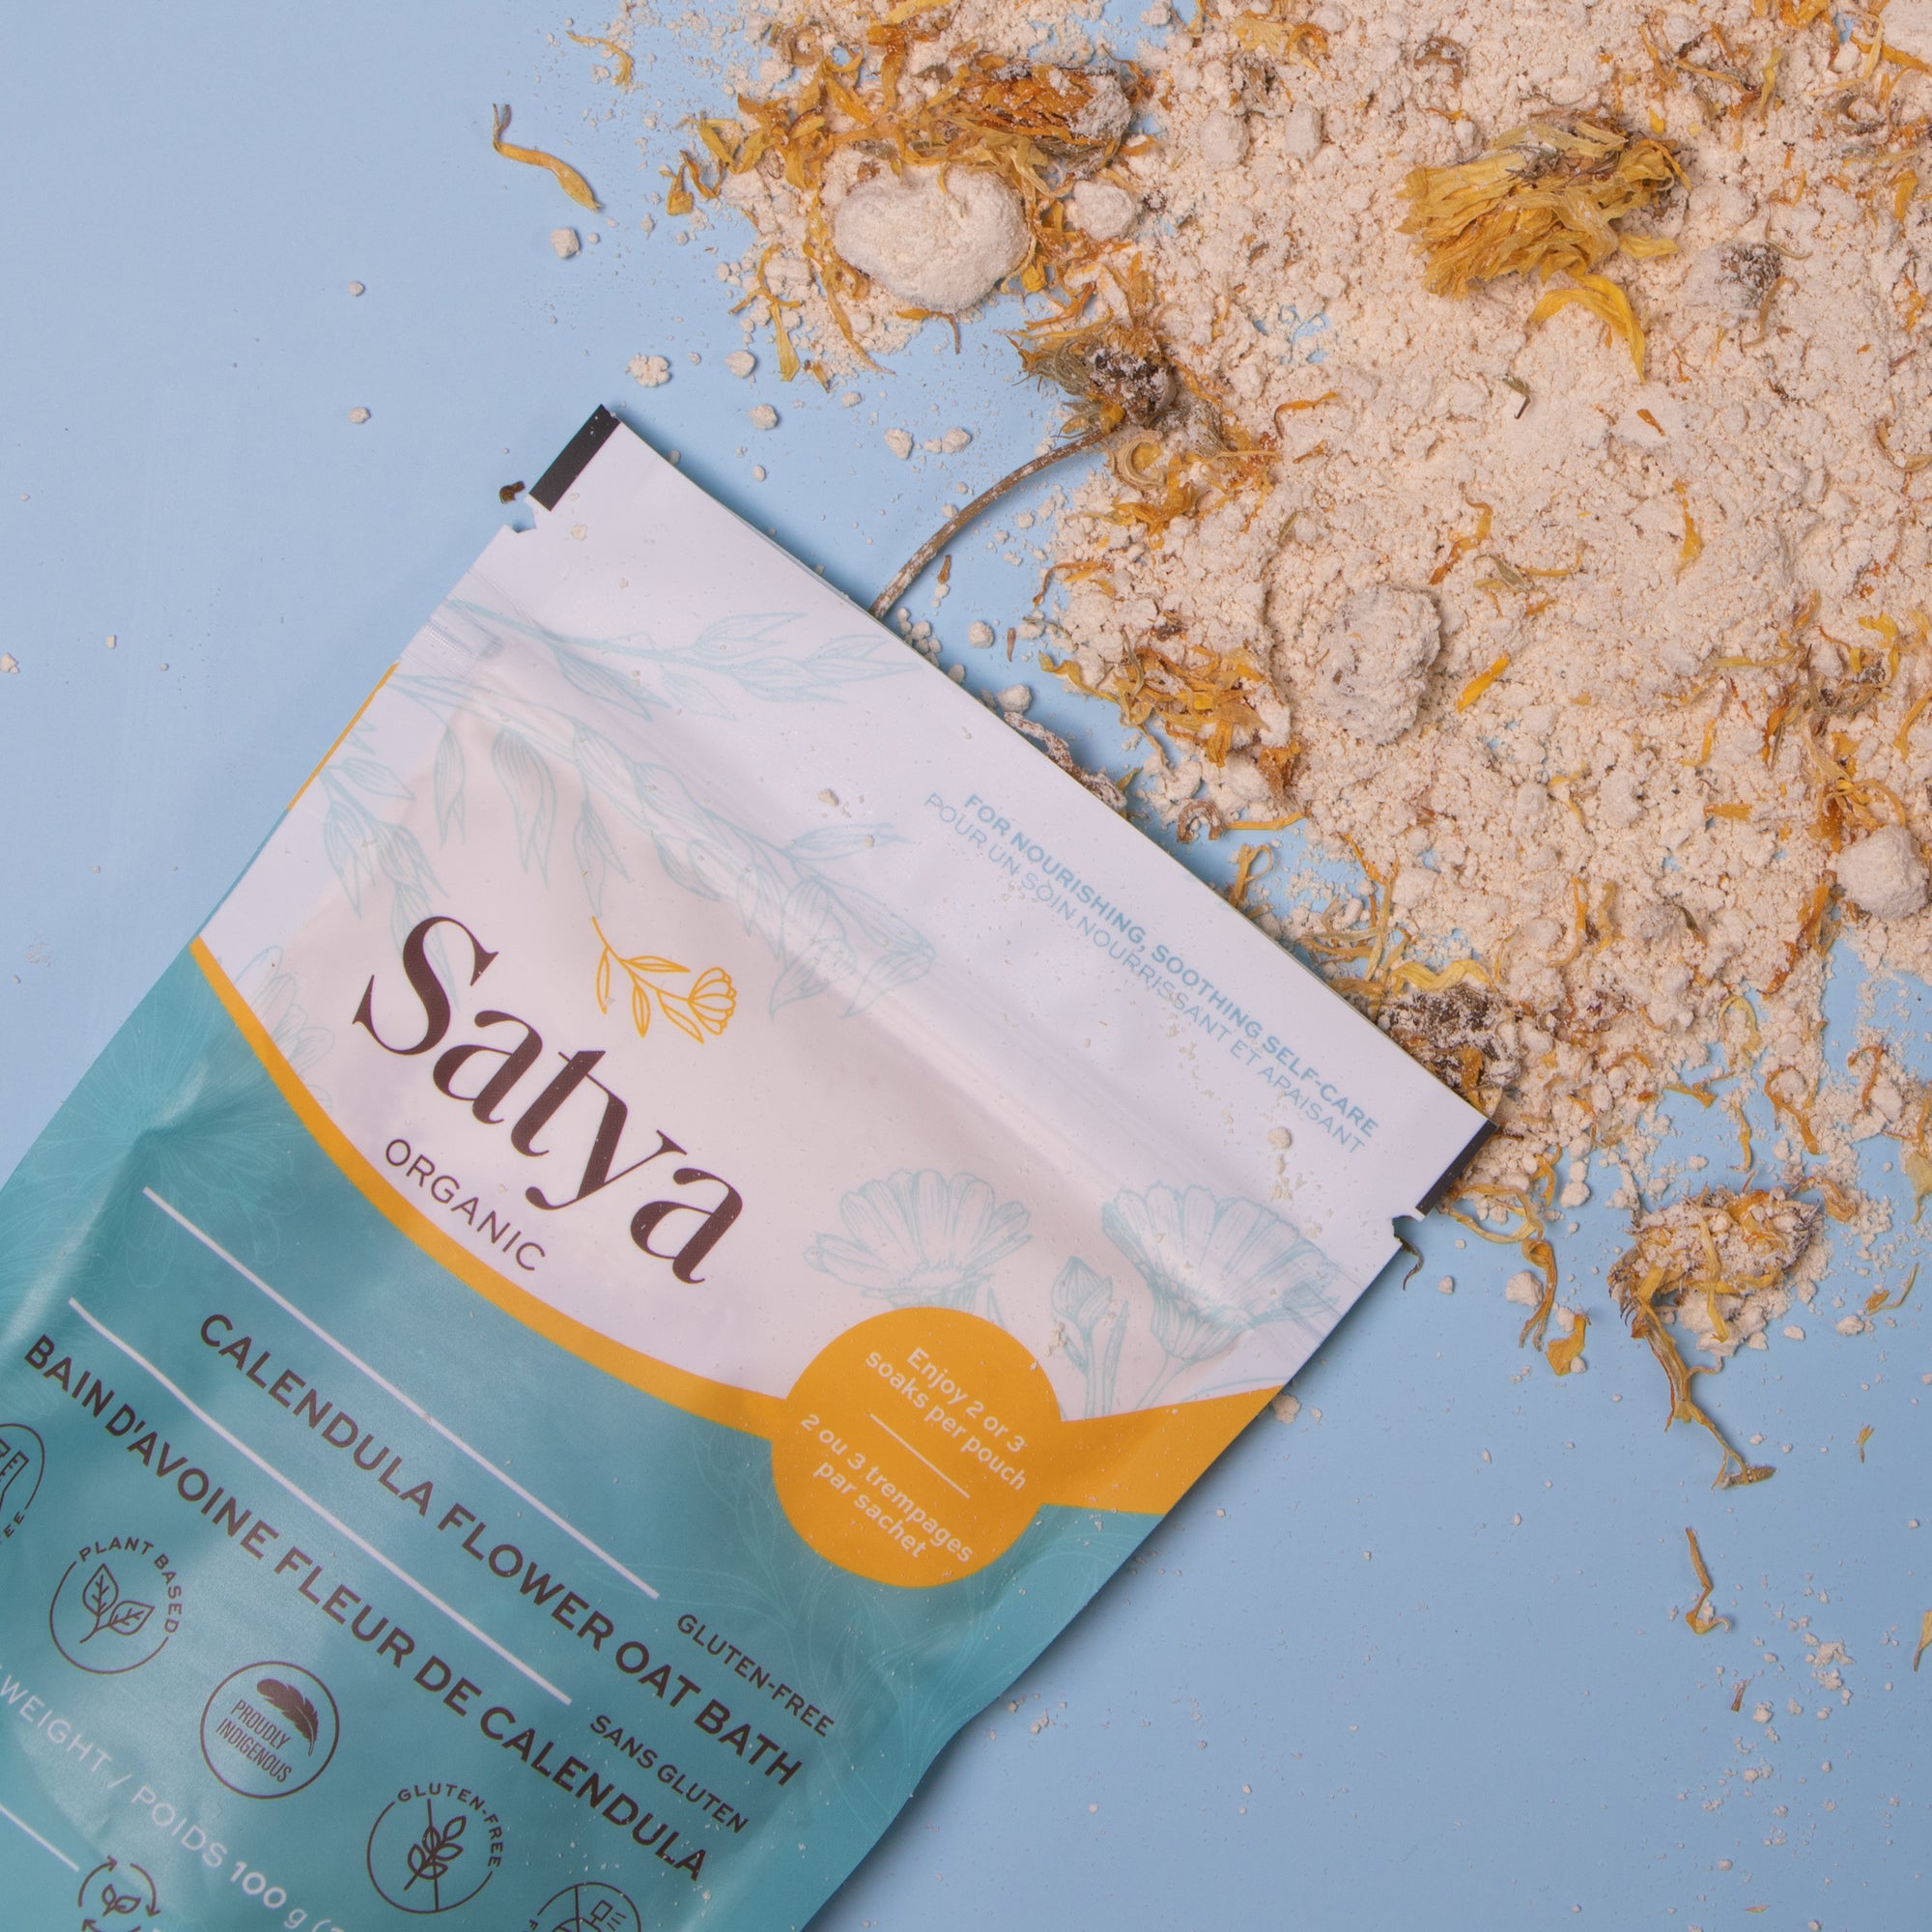 Satya Calendula Flower Oat Bath package with the contents spilled out.